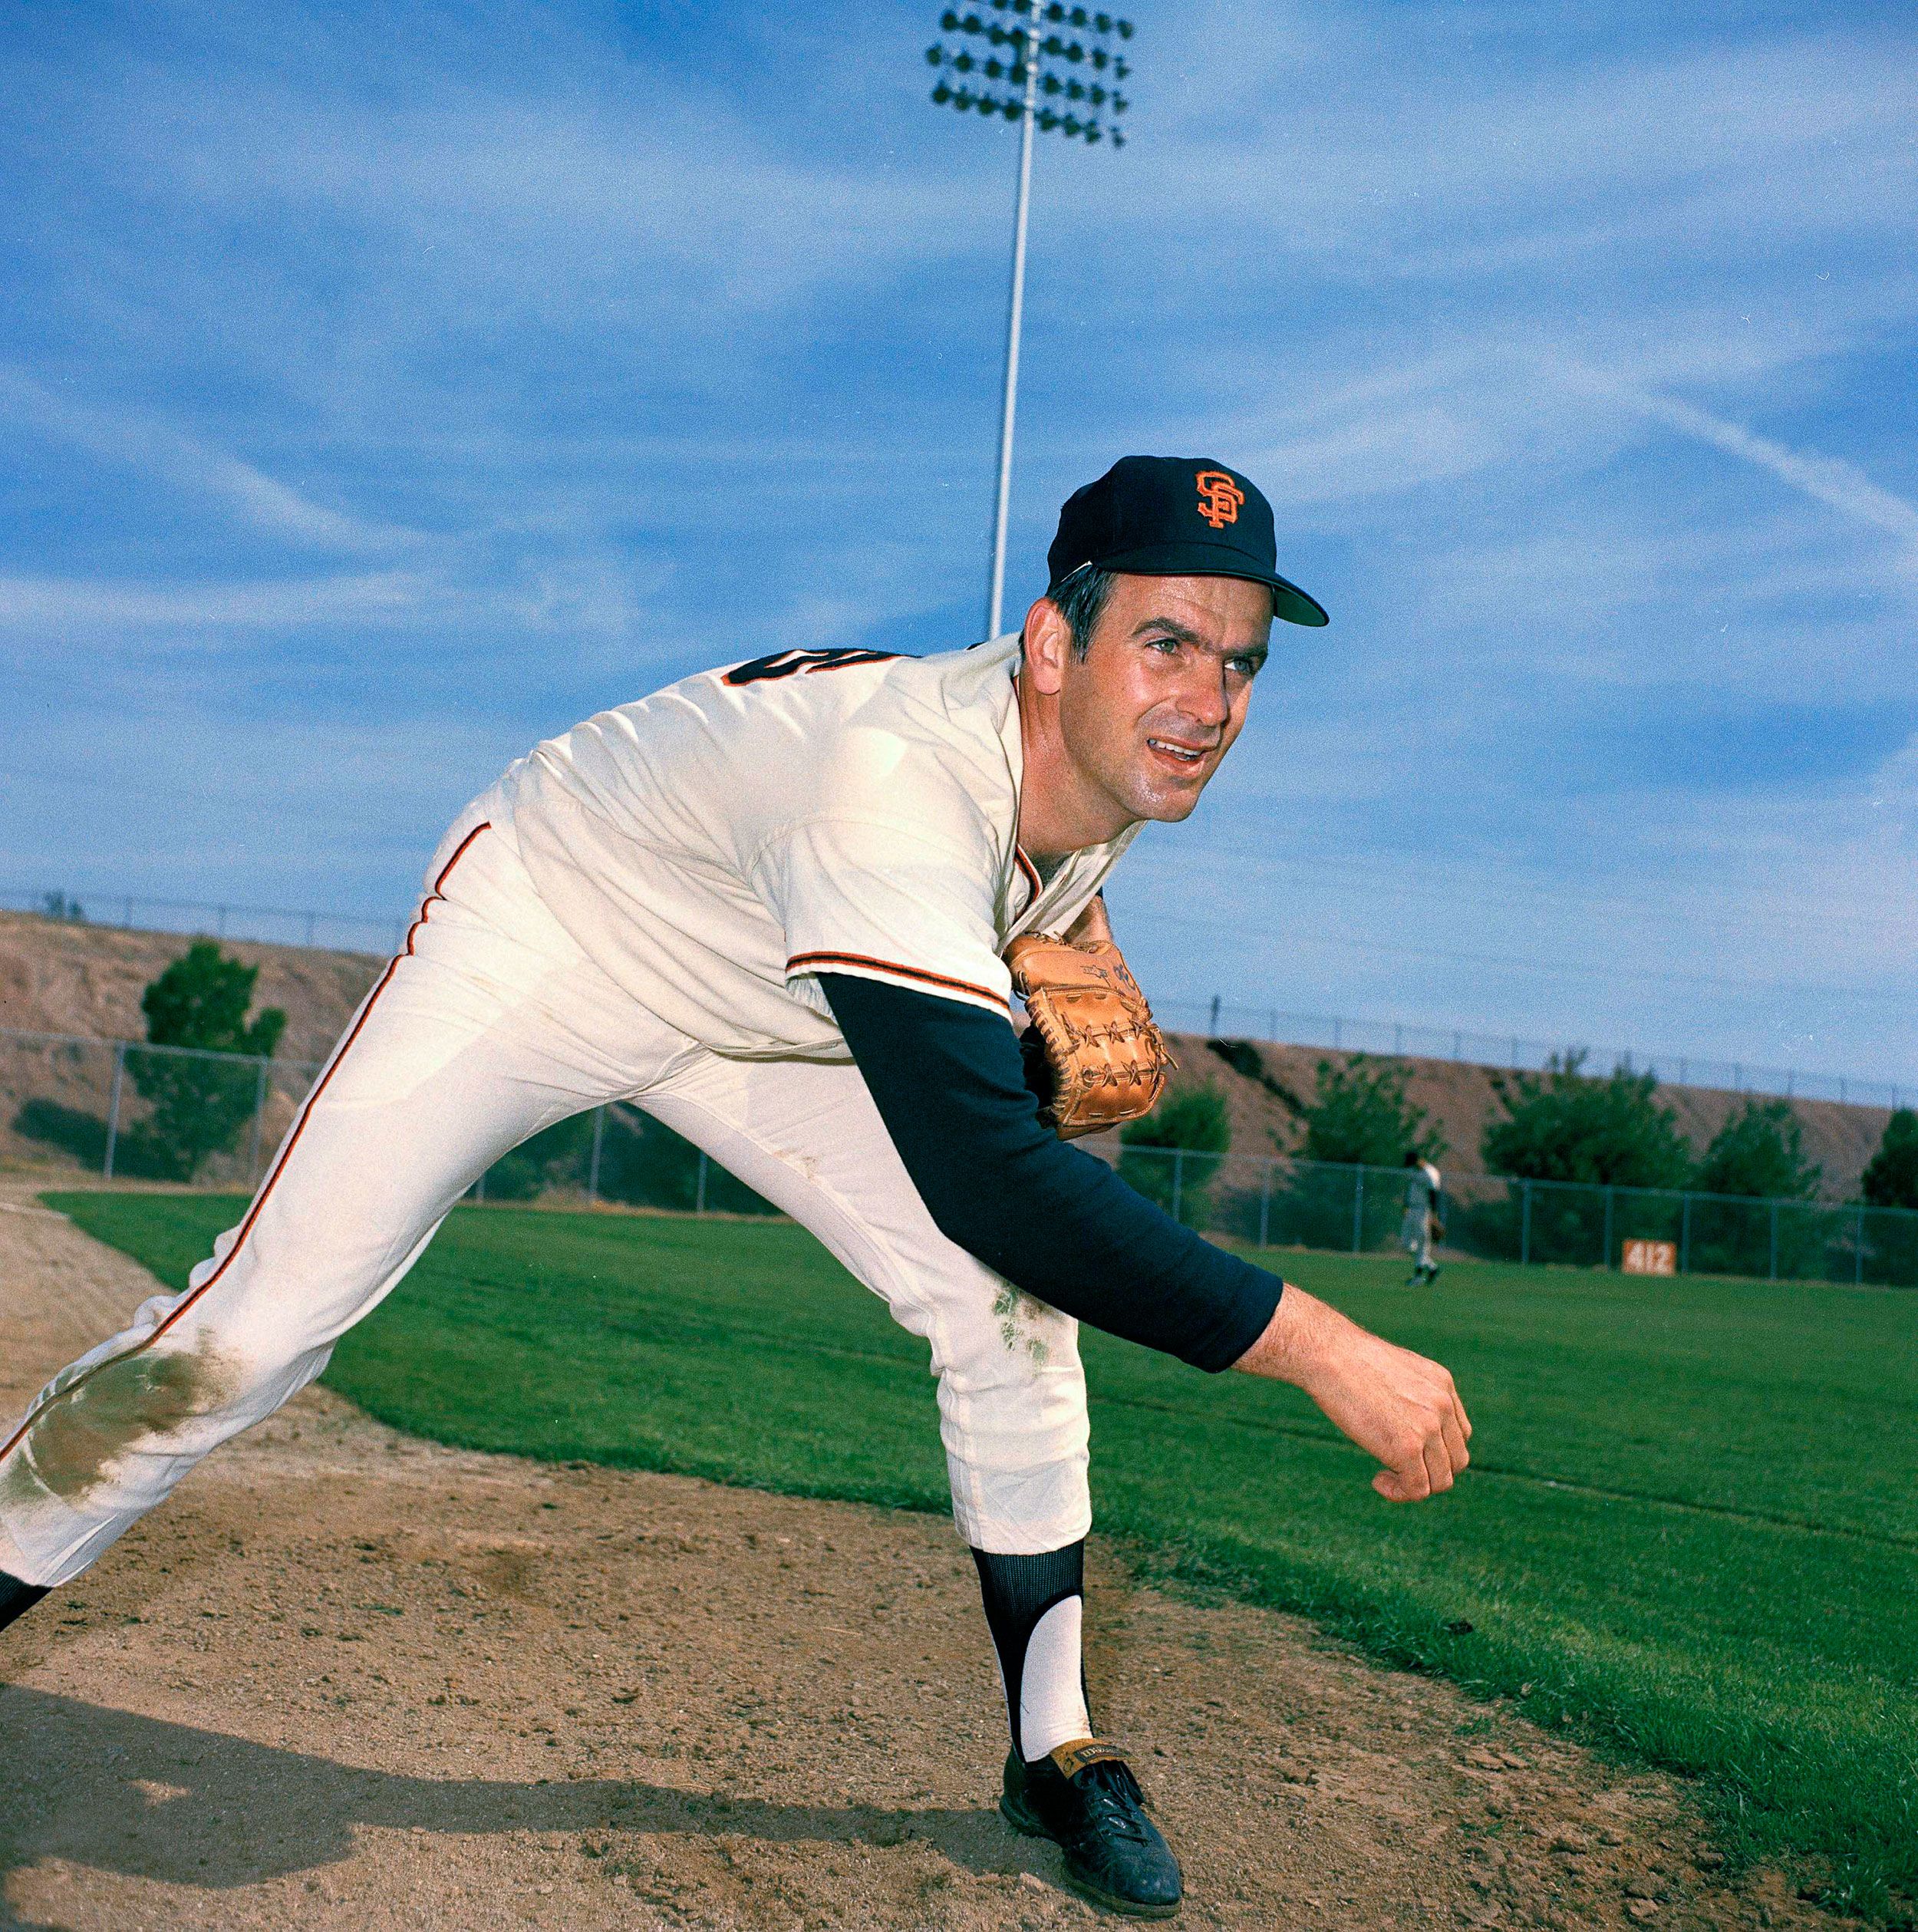 Hall of Famer Gaylord Perry, dead at 84, was a spitball-throwing